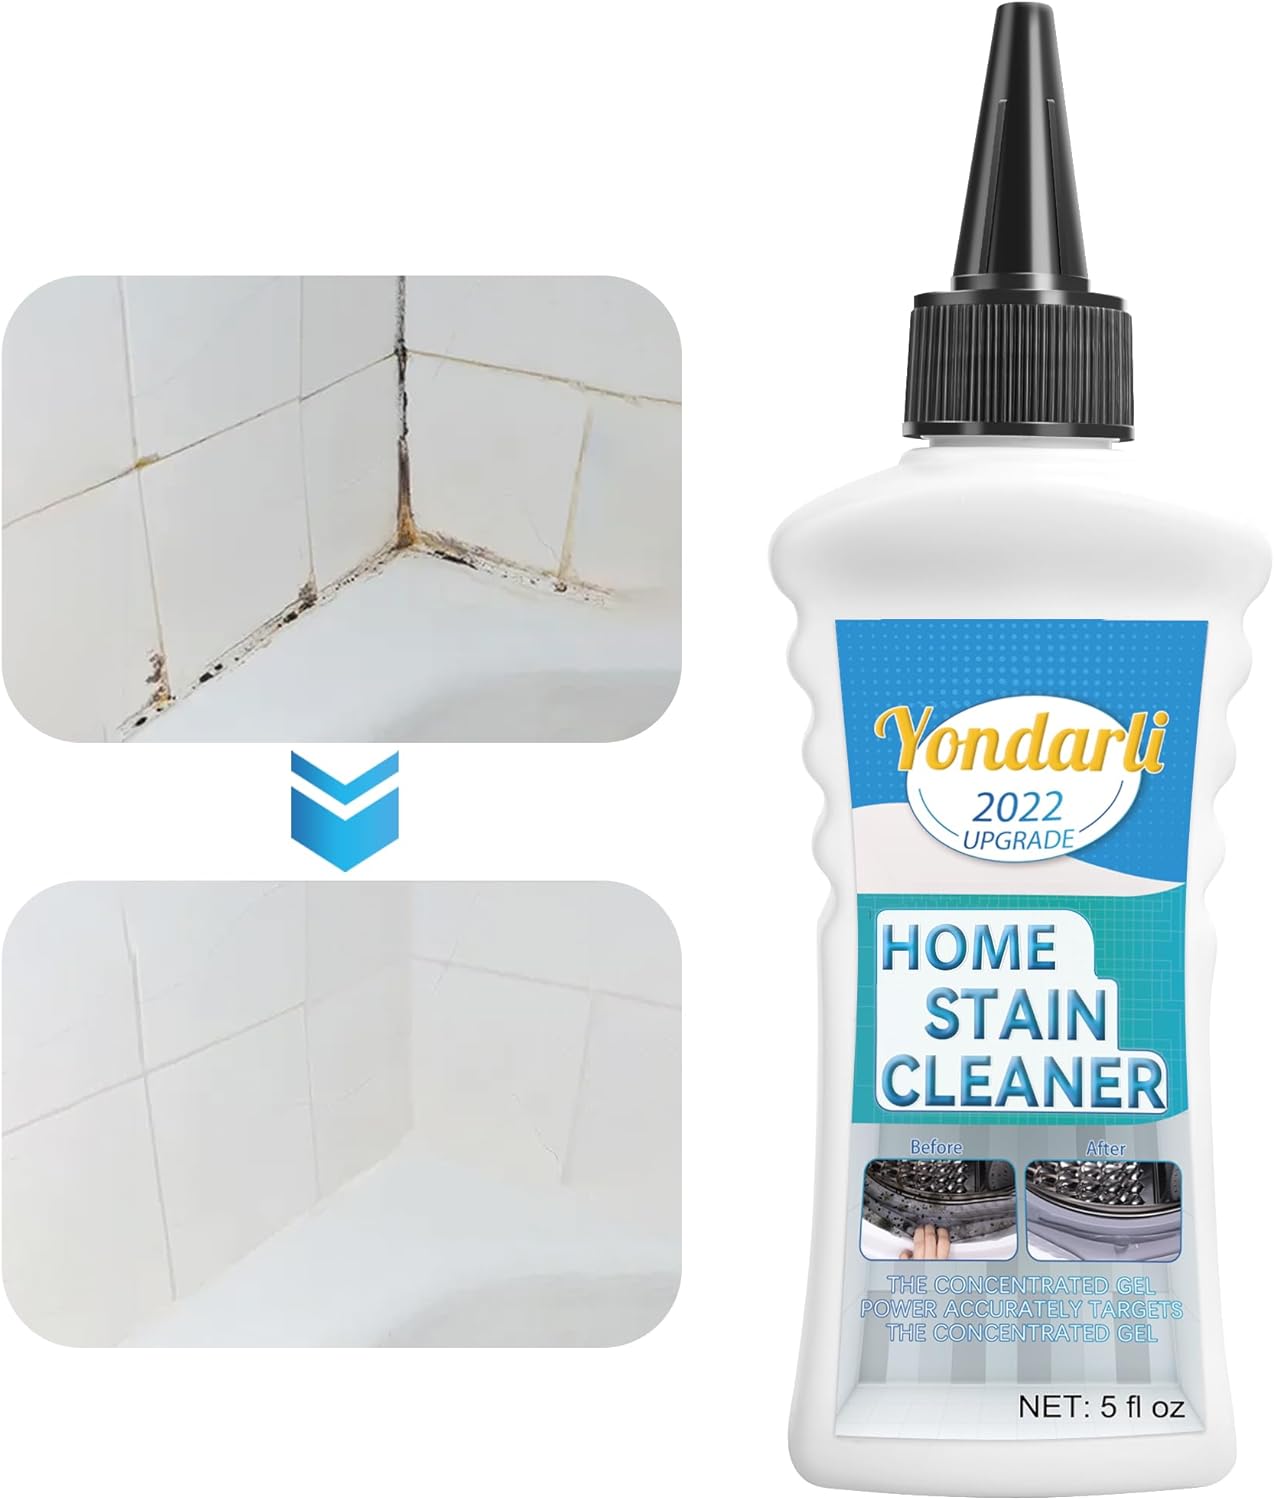 I had my doubts at first, but this was super easy to use, there was no elbow-grease scrubbing necessary and it turned my bathroom from nasty to brand new! I will definitely be getting this again!